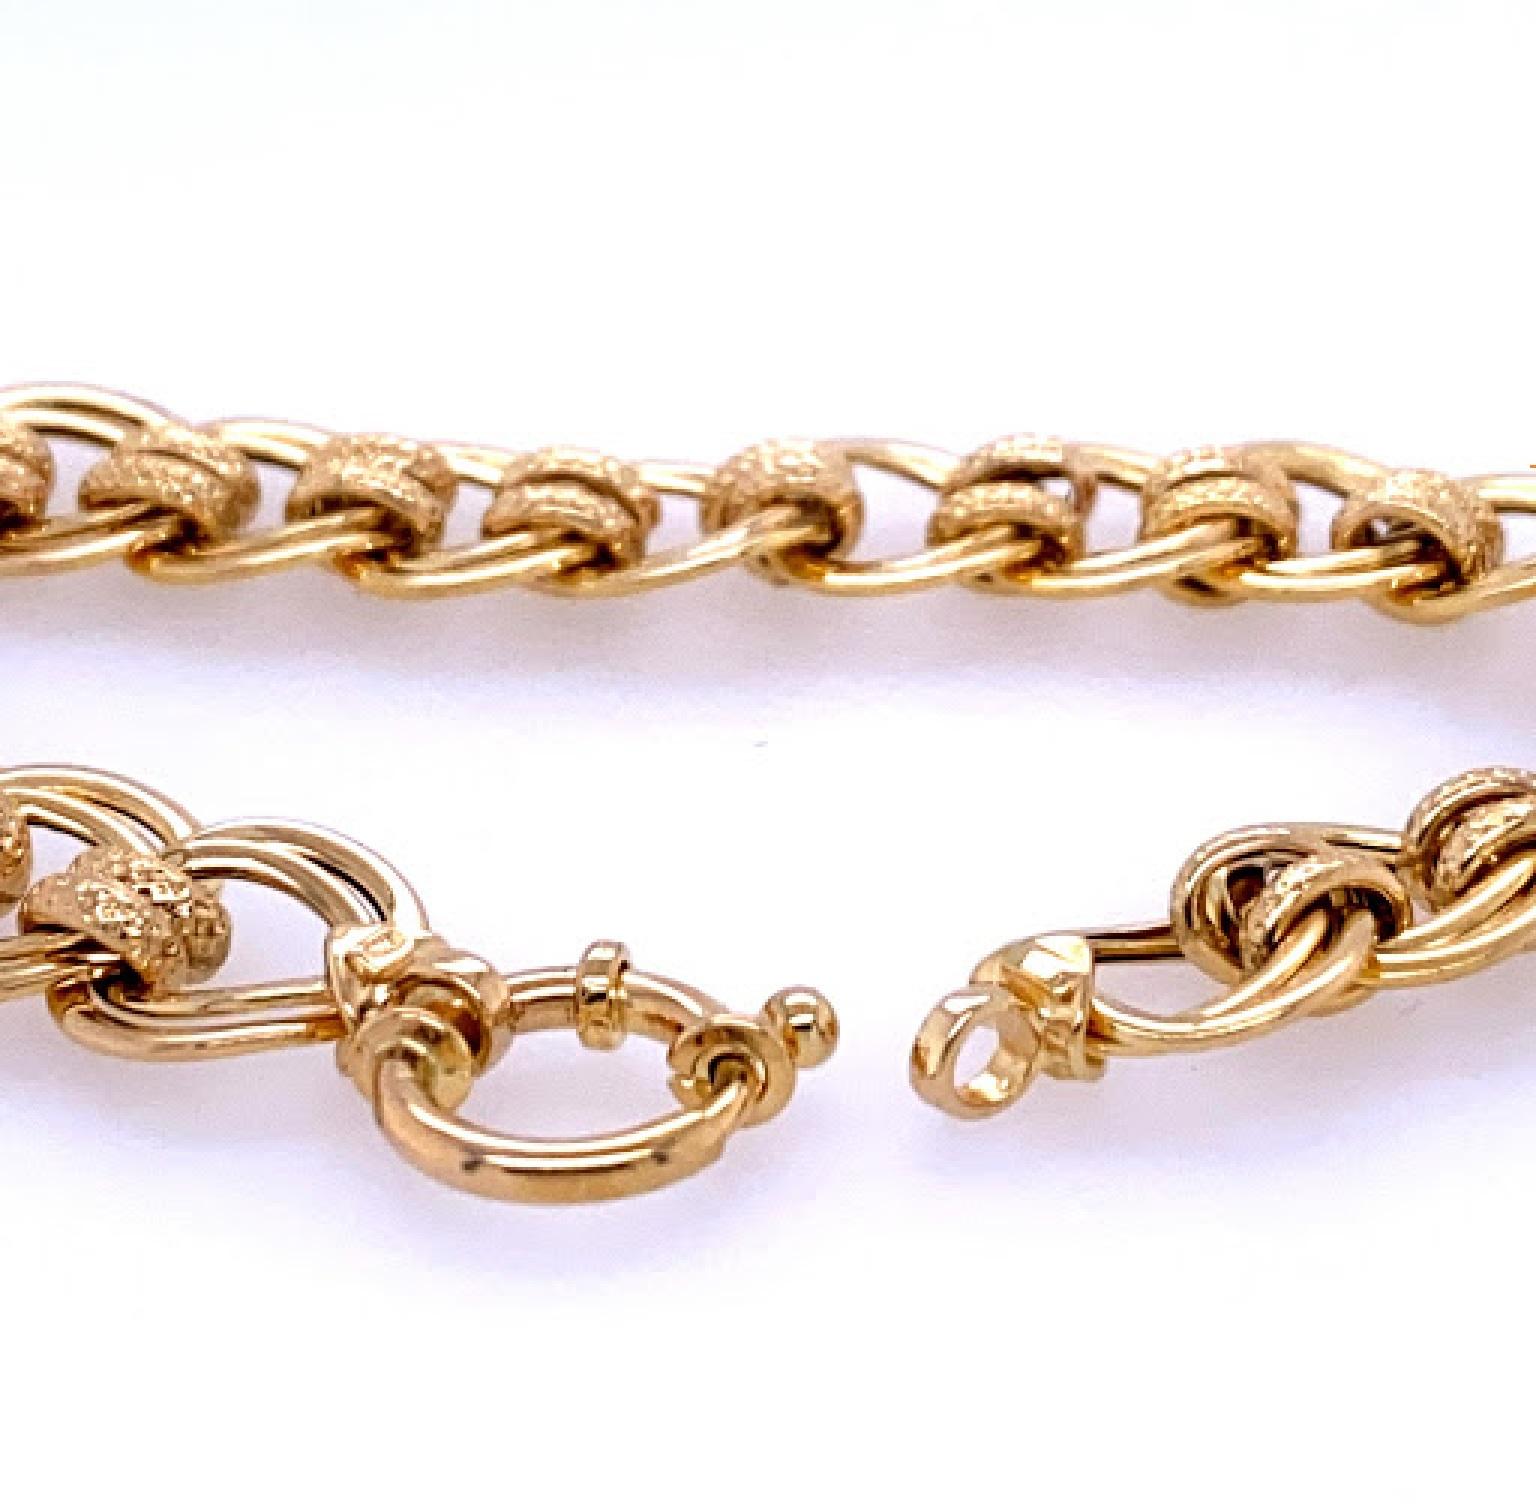 14 karat yellow gold (stamped 585), 8’’ long open double circle link bracelet. The bracelet measures 12.5 mm wide, and 11.75 mm wide3 at the spring ring clasp.